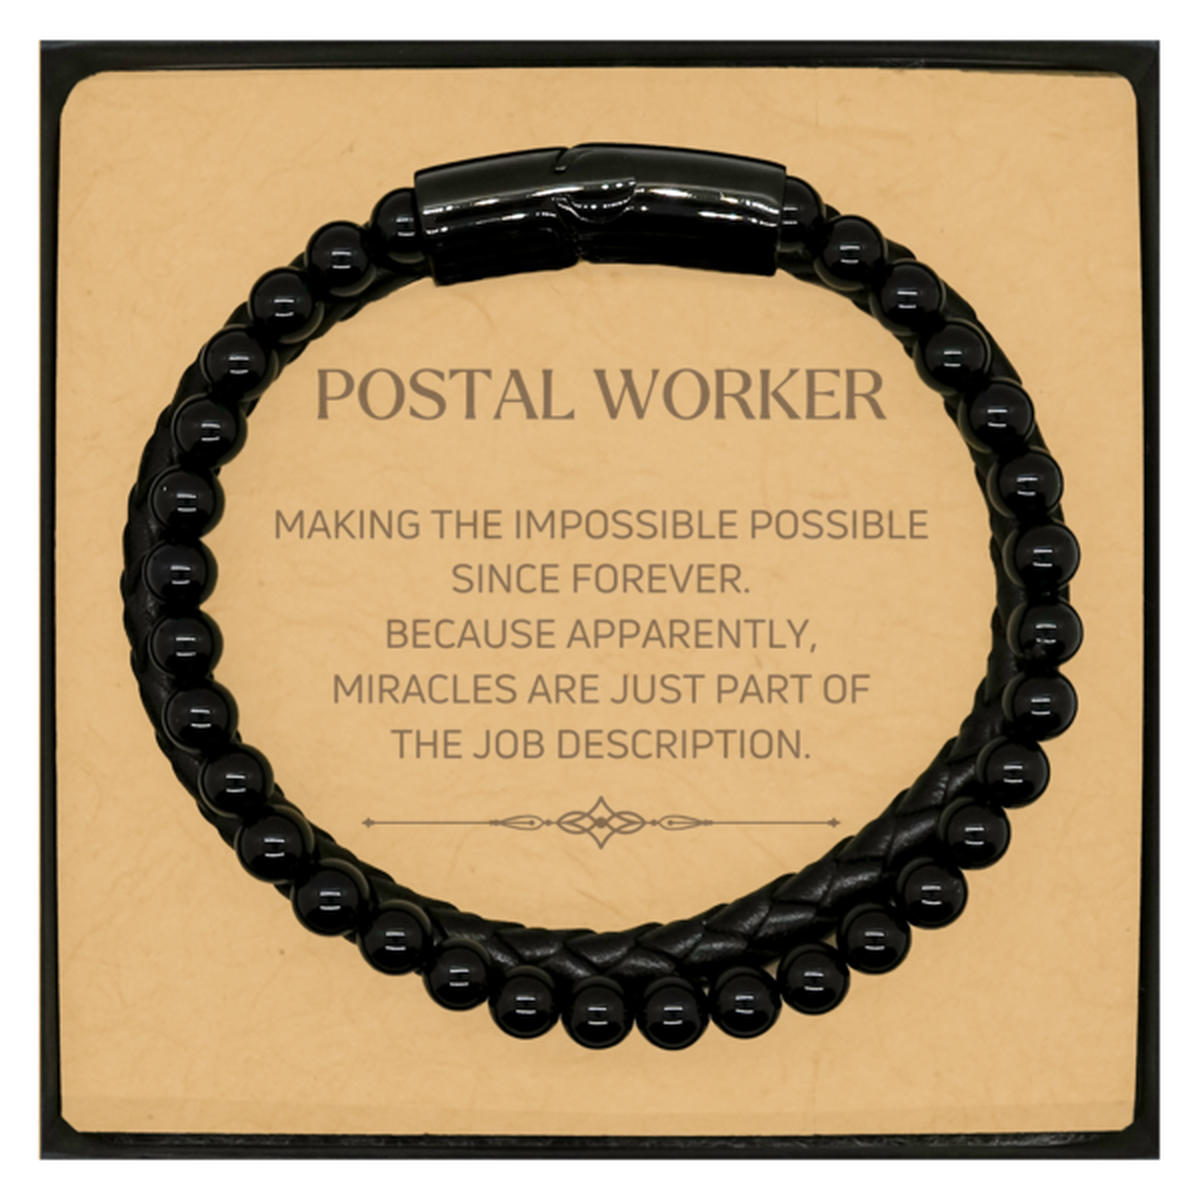 Funny Postal Worker Gifts, Miracles are just part of the job description, Inspirational Birthday Christmas Stone Leather Bracelets For Postal Worker, Men, Women, Coworkers, Friends, Boss